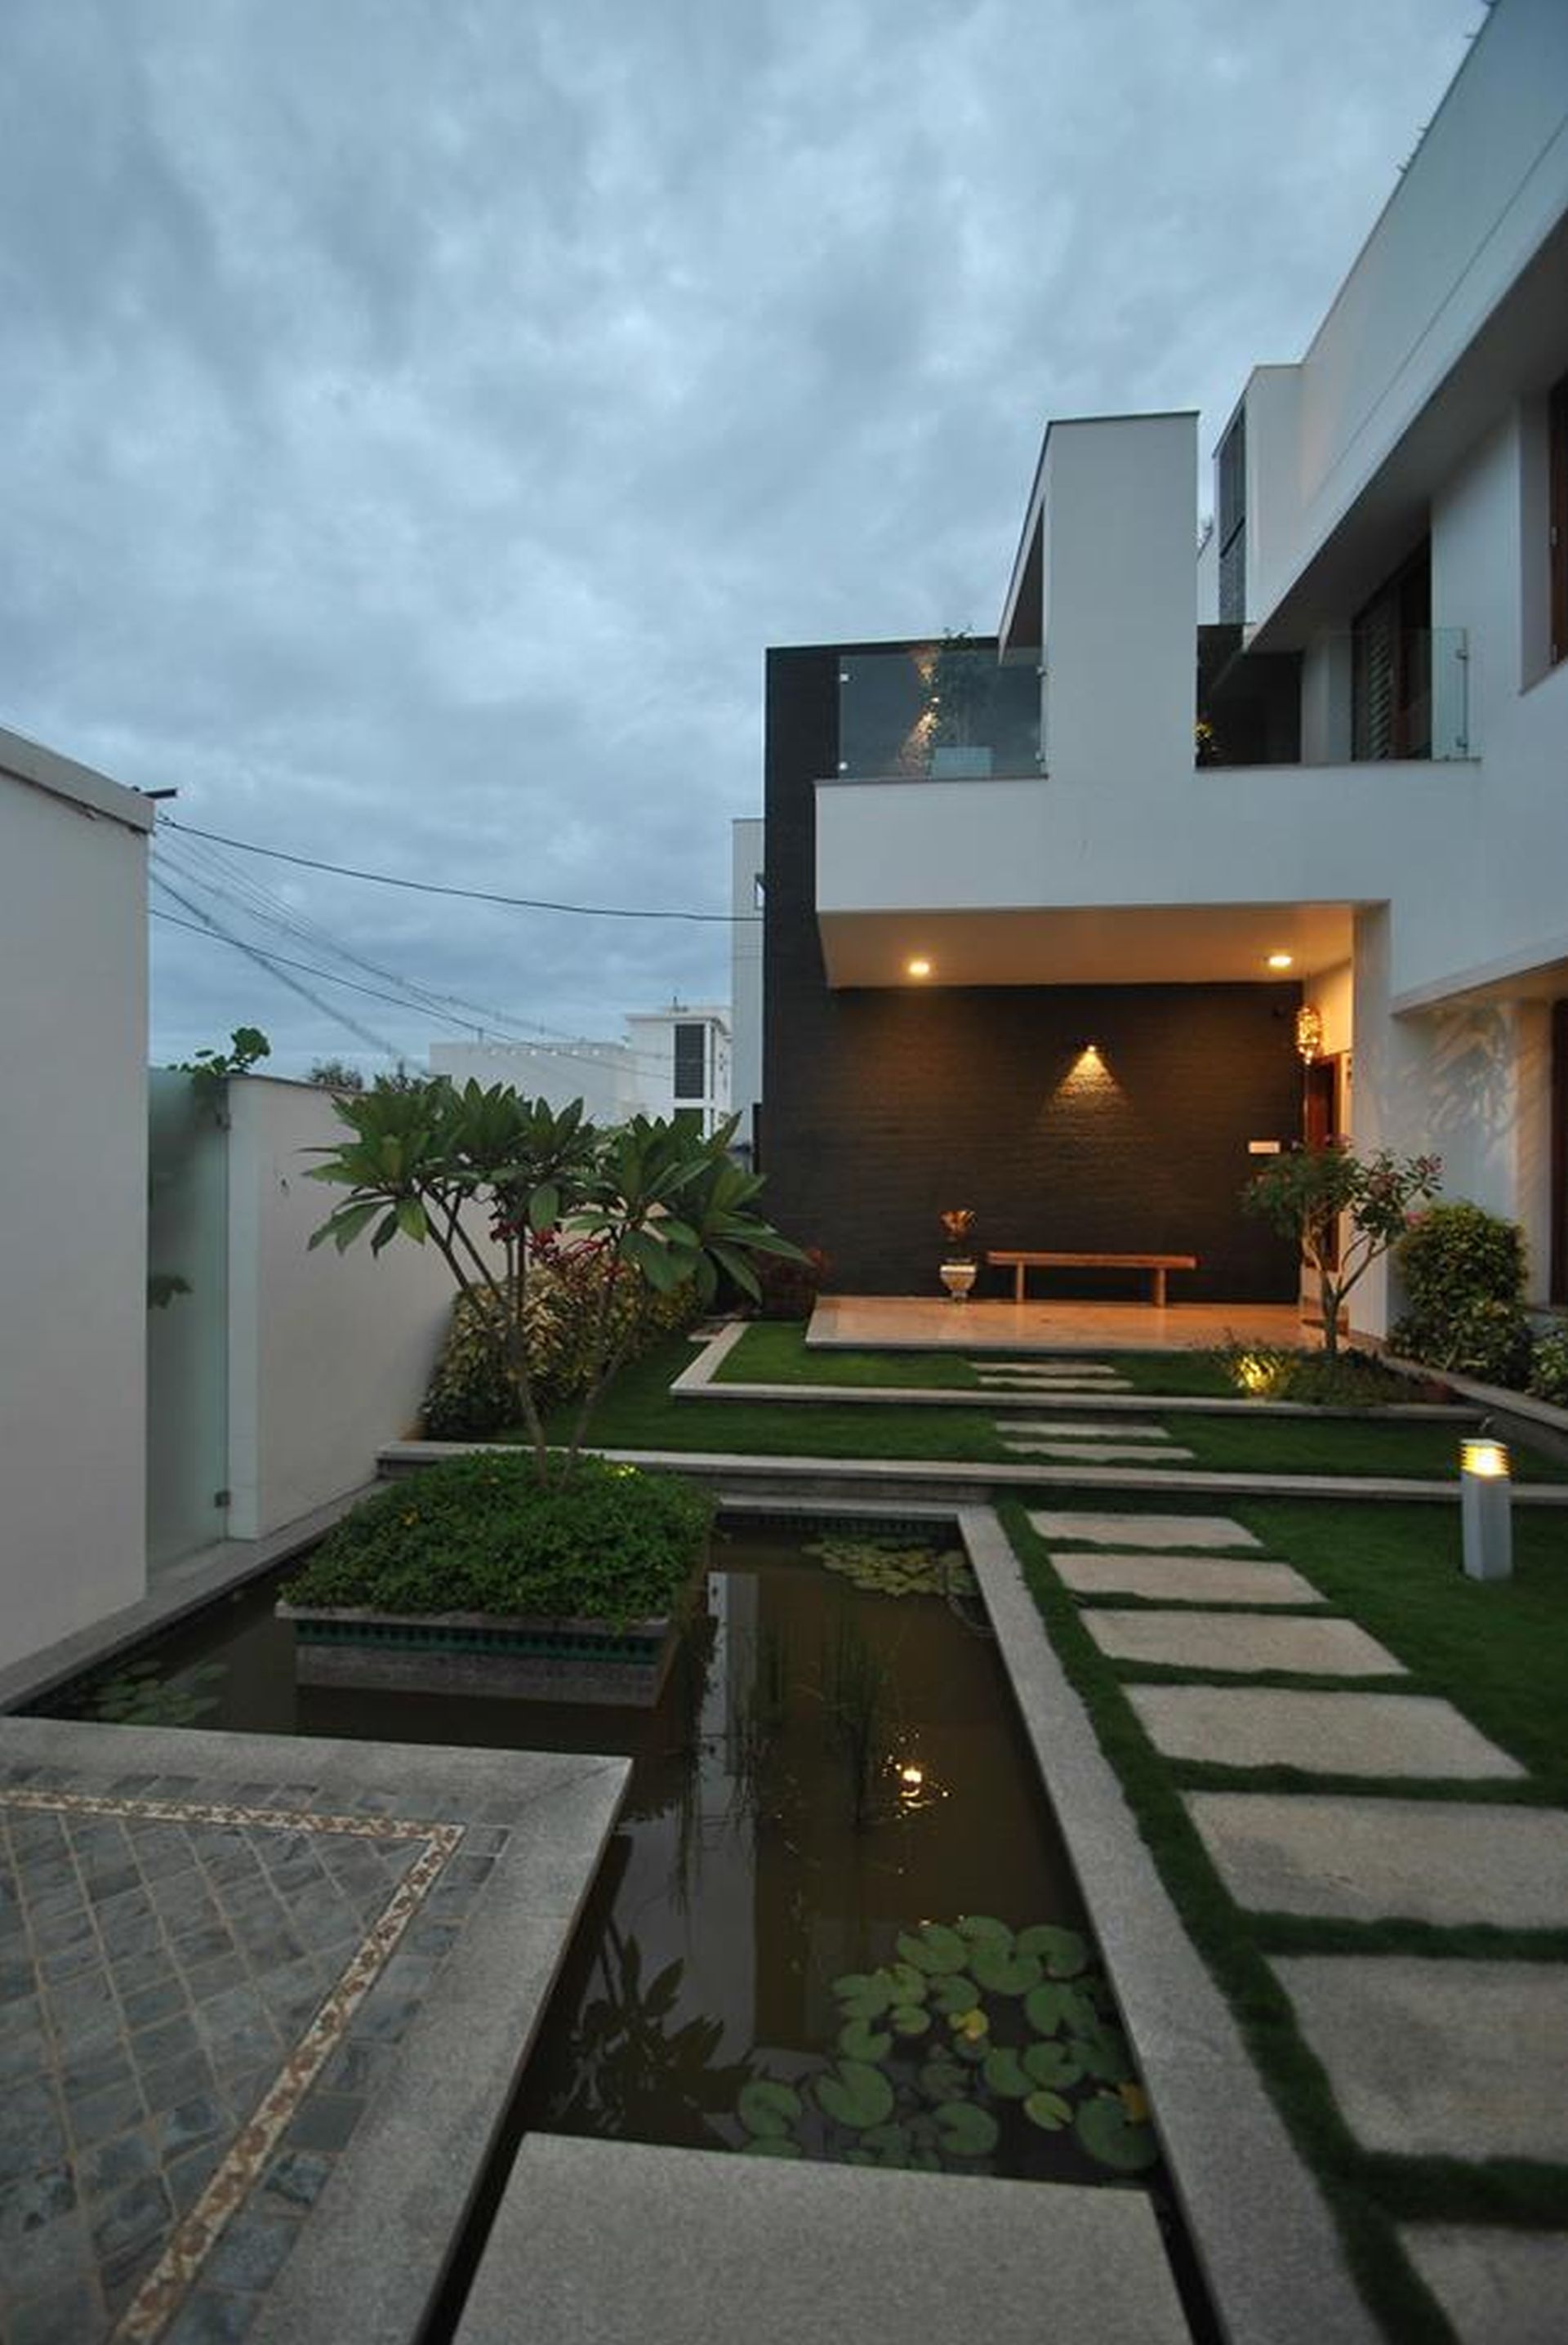 Mr & Mrs Pannerselvam's Residence at Erode by Murali Architects